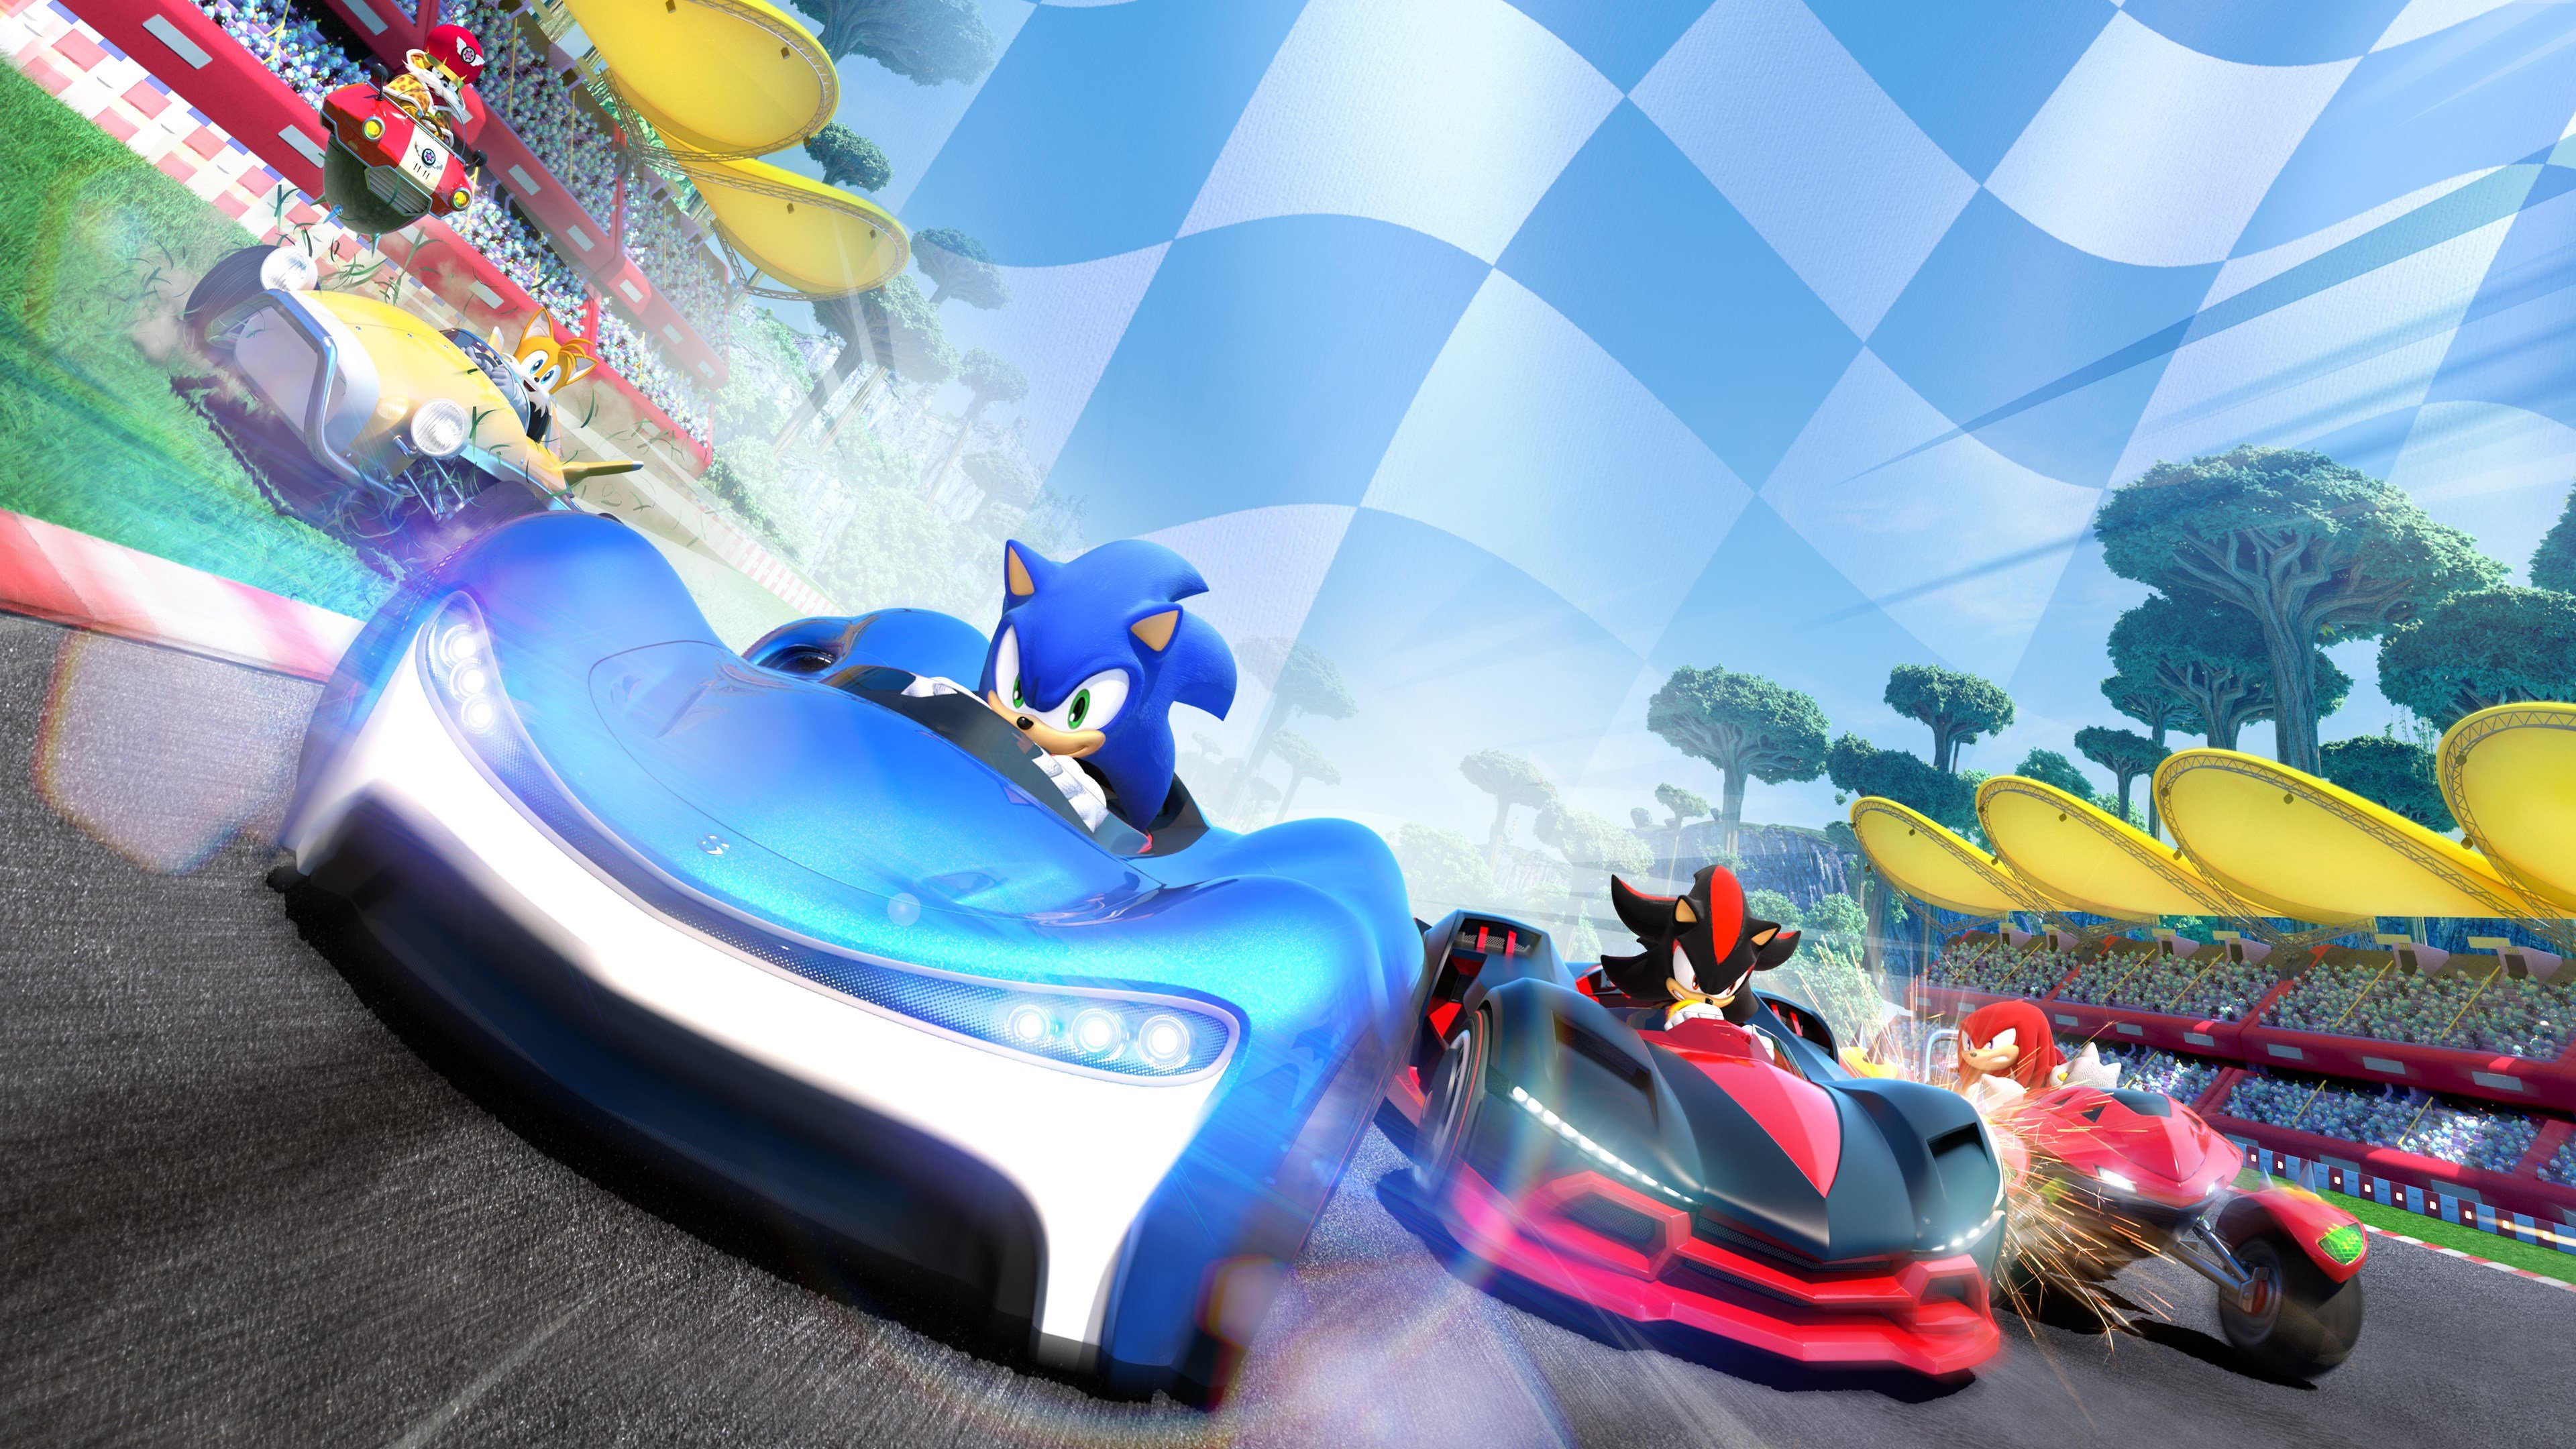 Team Sonic Racing™ cover image